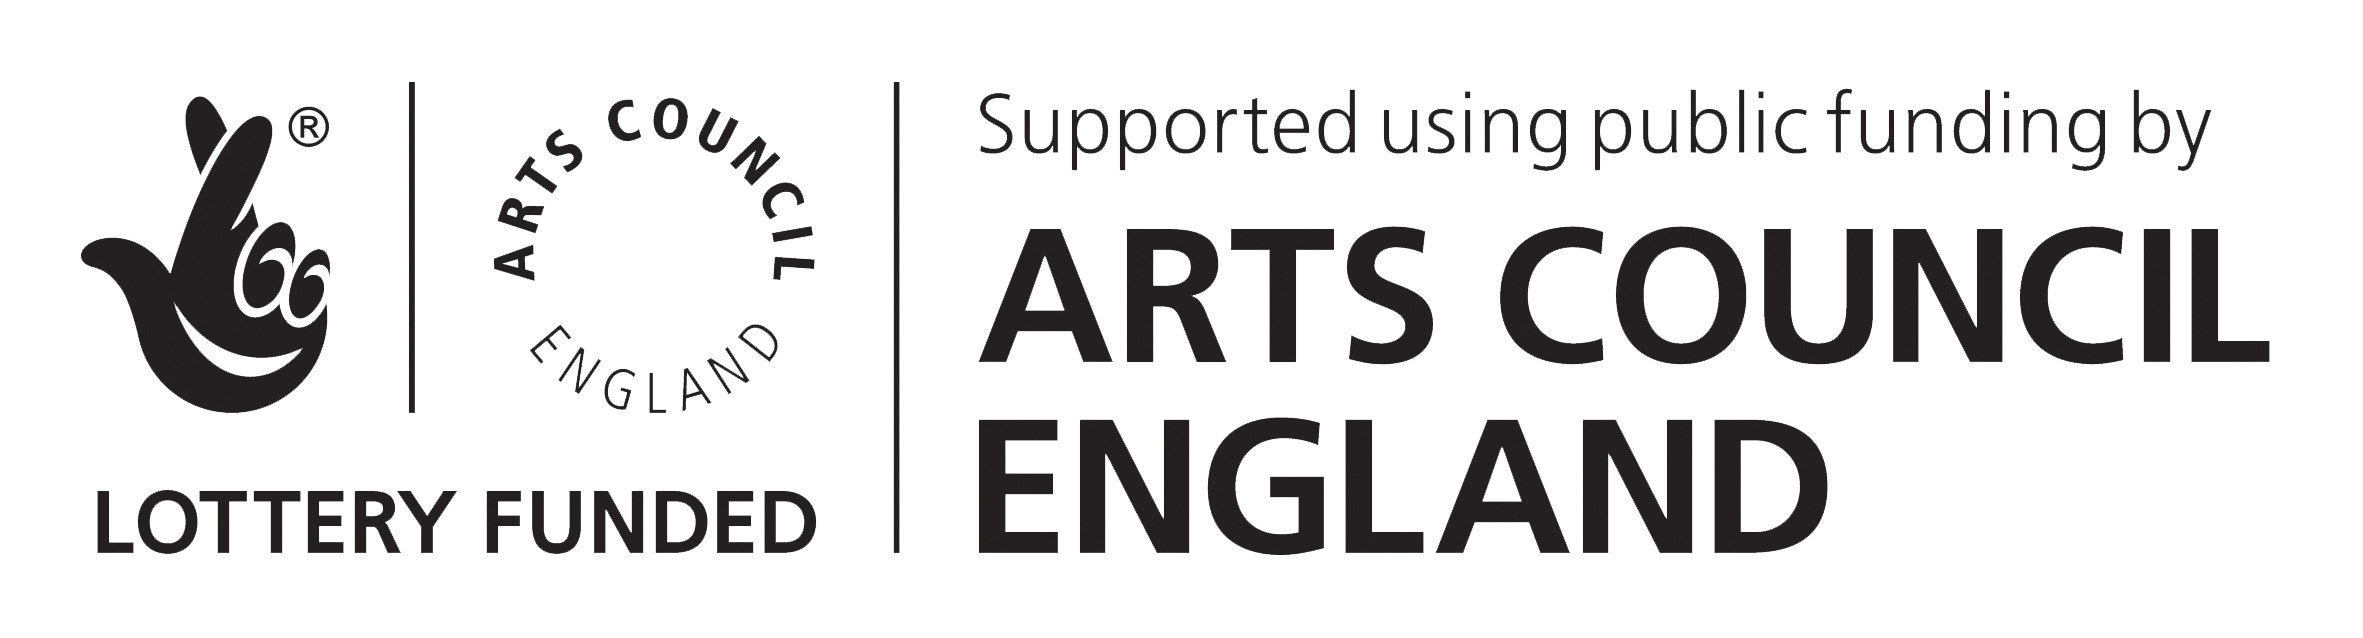 Arts Council England logo supported by National Lottery